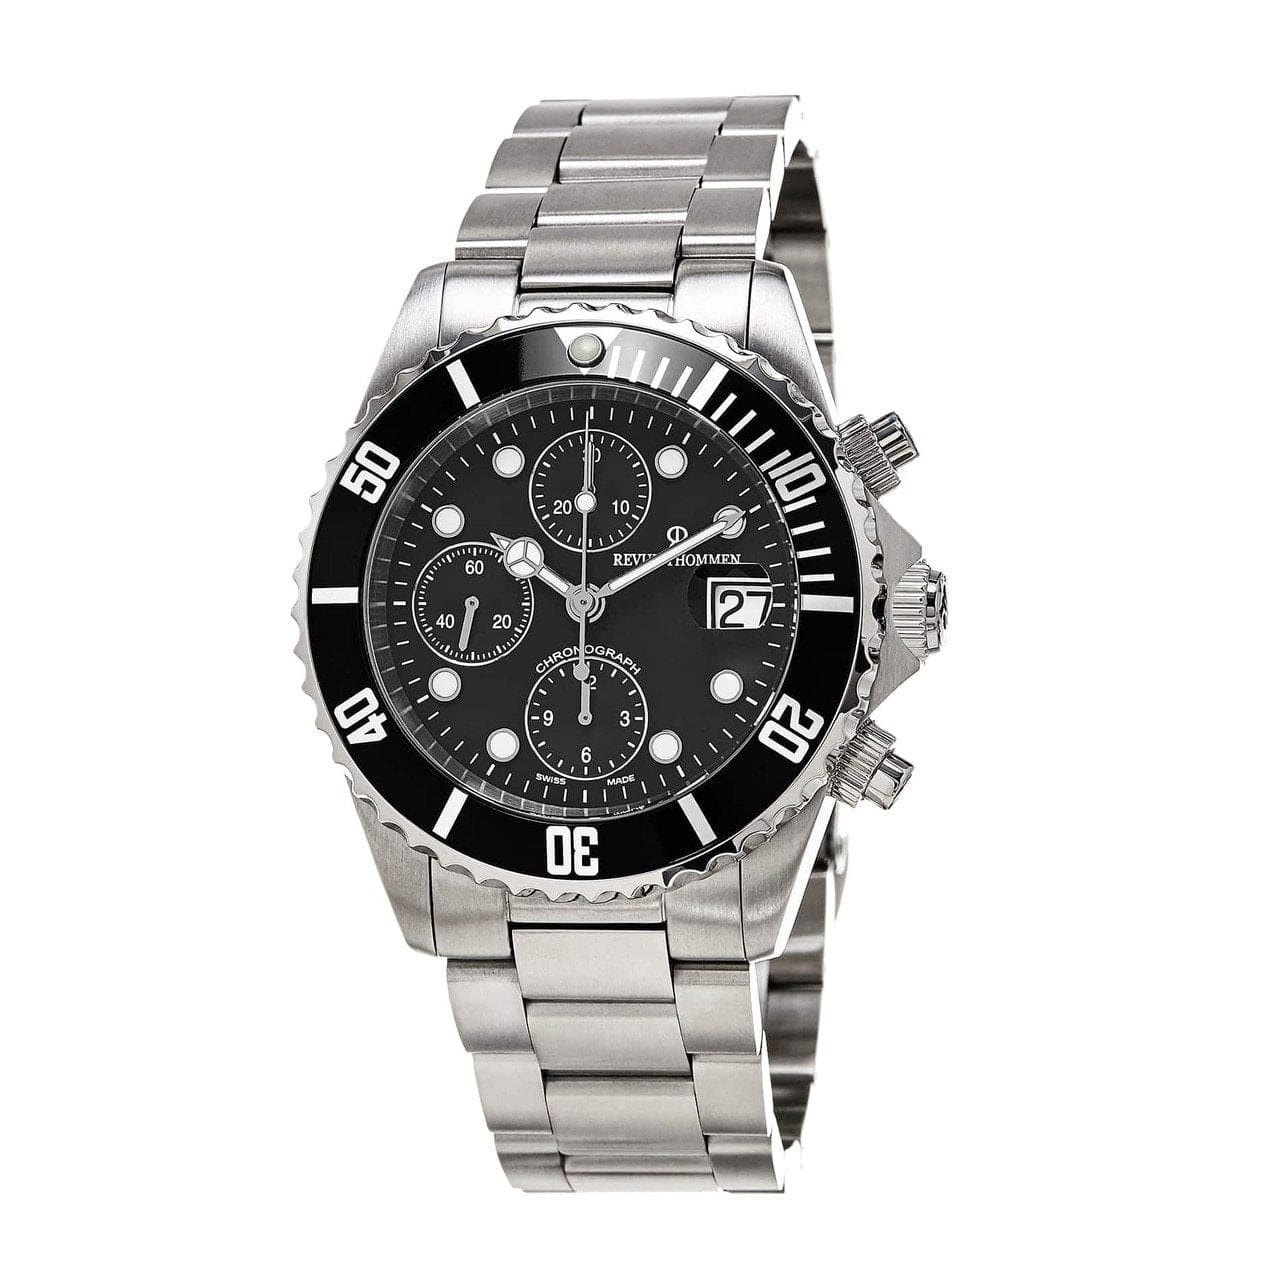 Revue Thommen 17571.6137 Diver Silver Stainless Steel Black Dial Chronograph Automatic Watch 794504234947